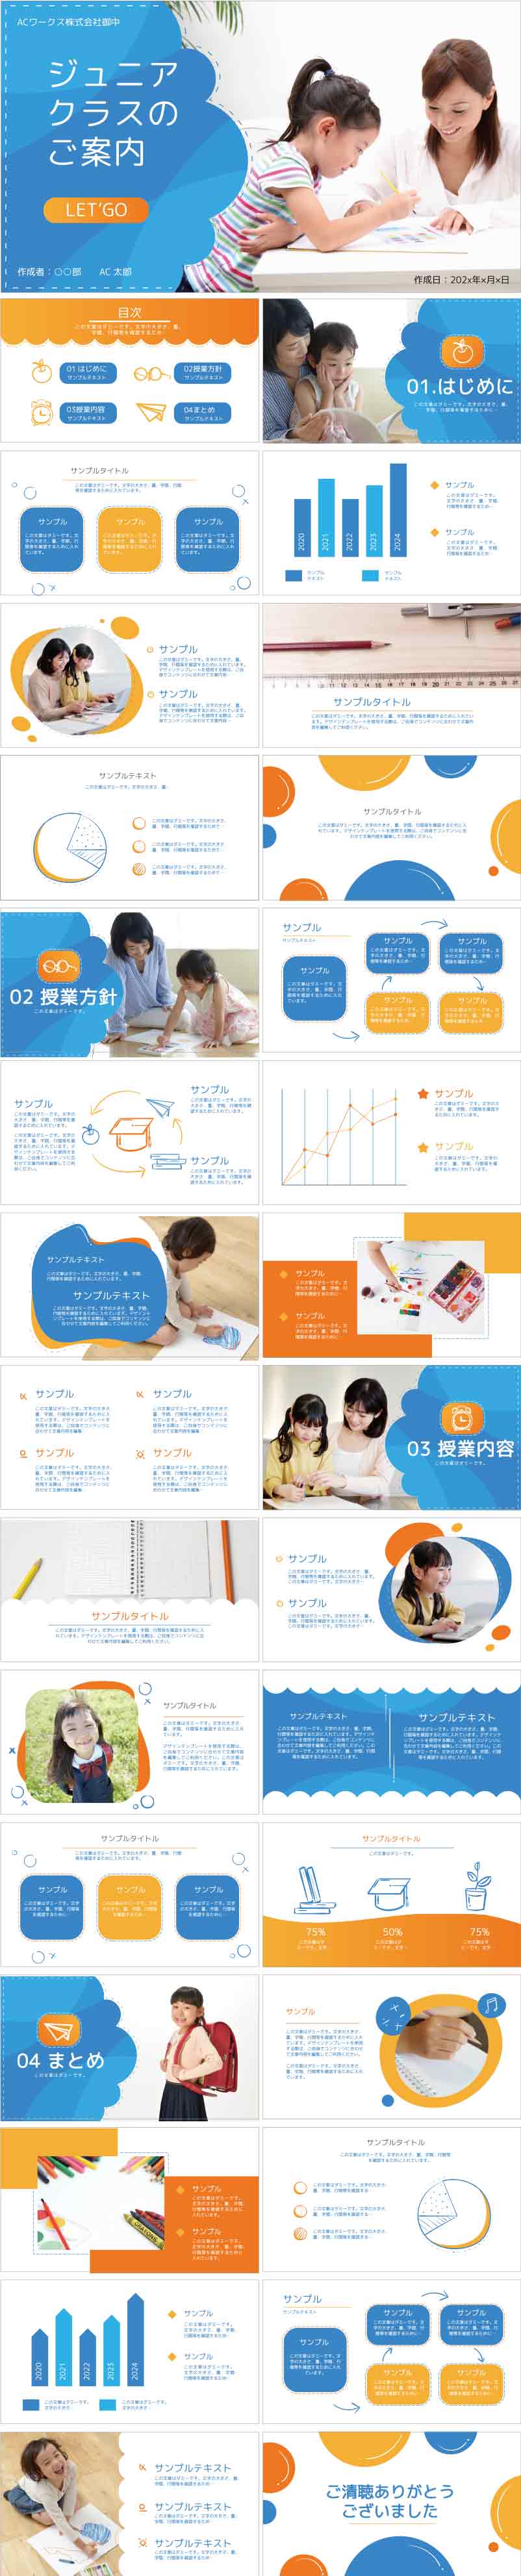 PowerPoint template vol.97